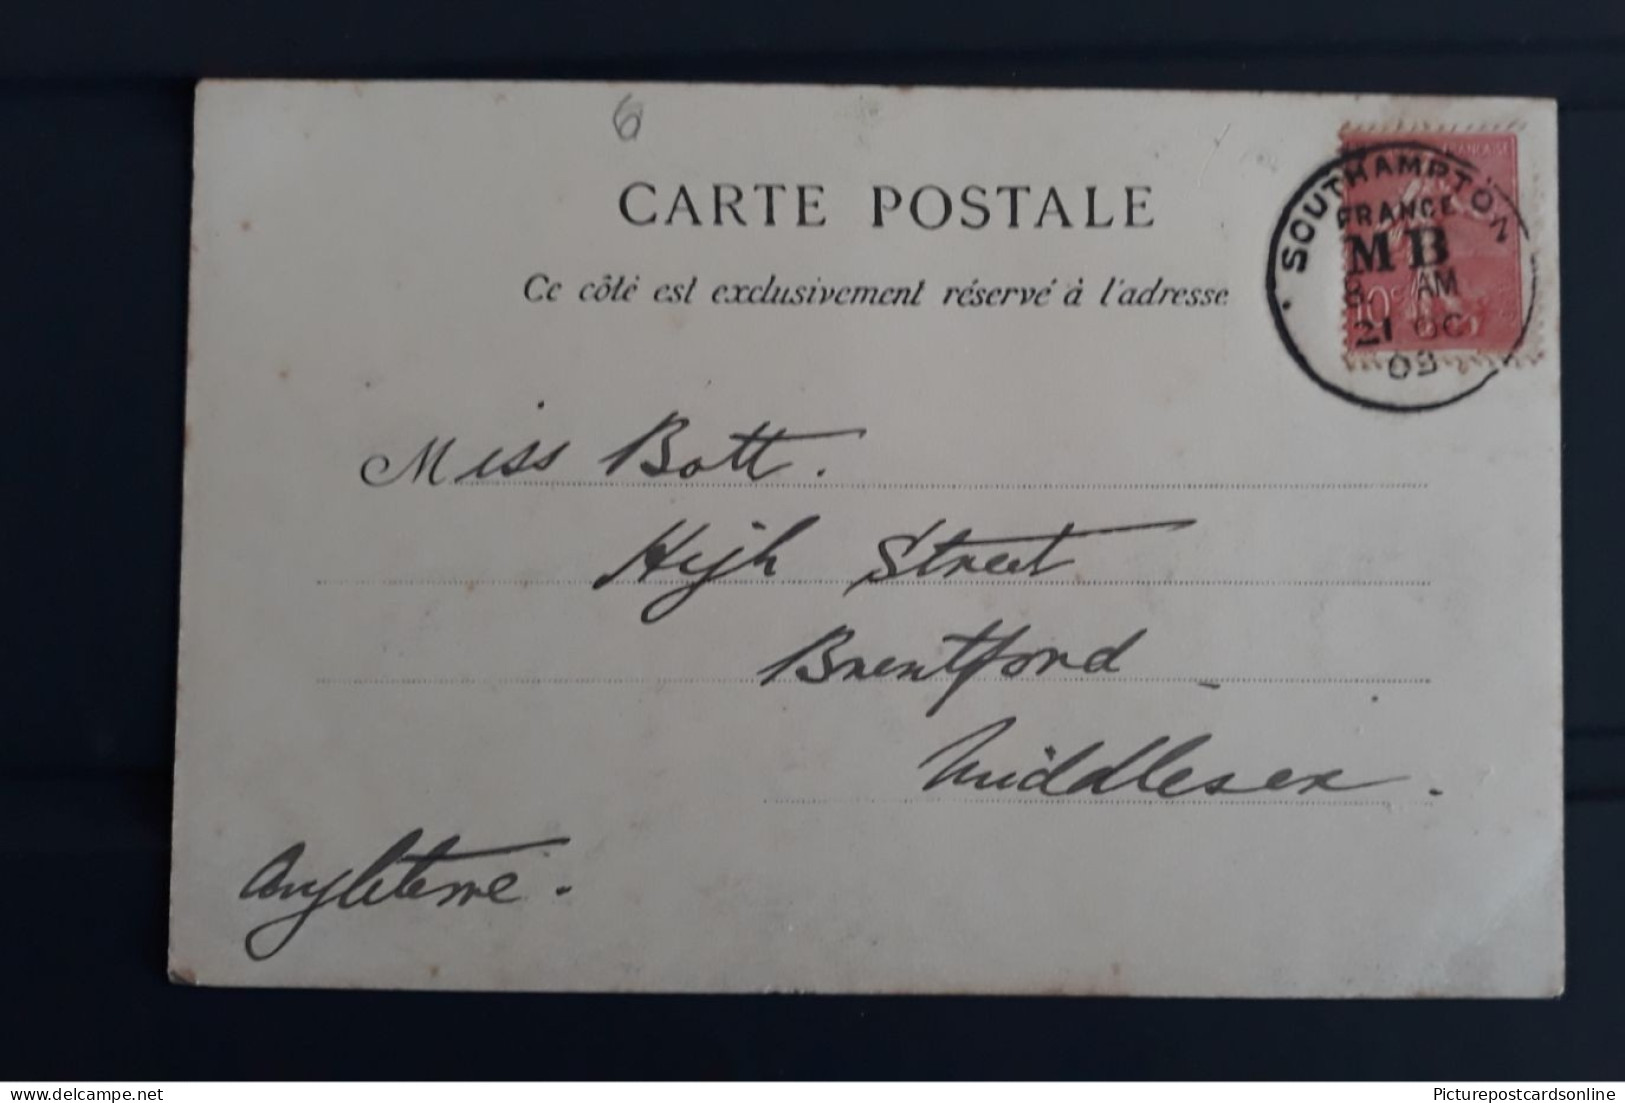 SOUTHAMPTON FRANCE MOVABLE BOX POSTMARK ON OLD FRENCH POSTCARD MB 21 OCT 1903 - Unclassified